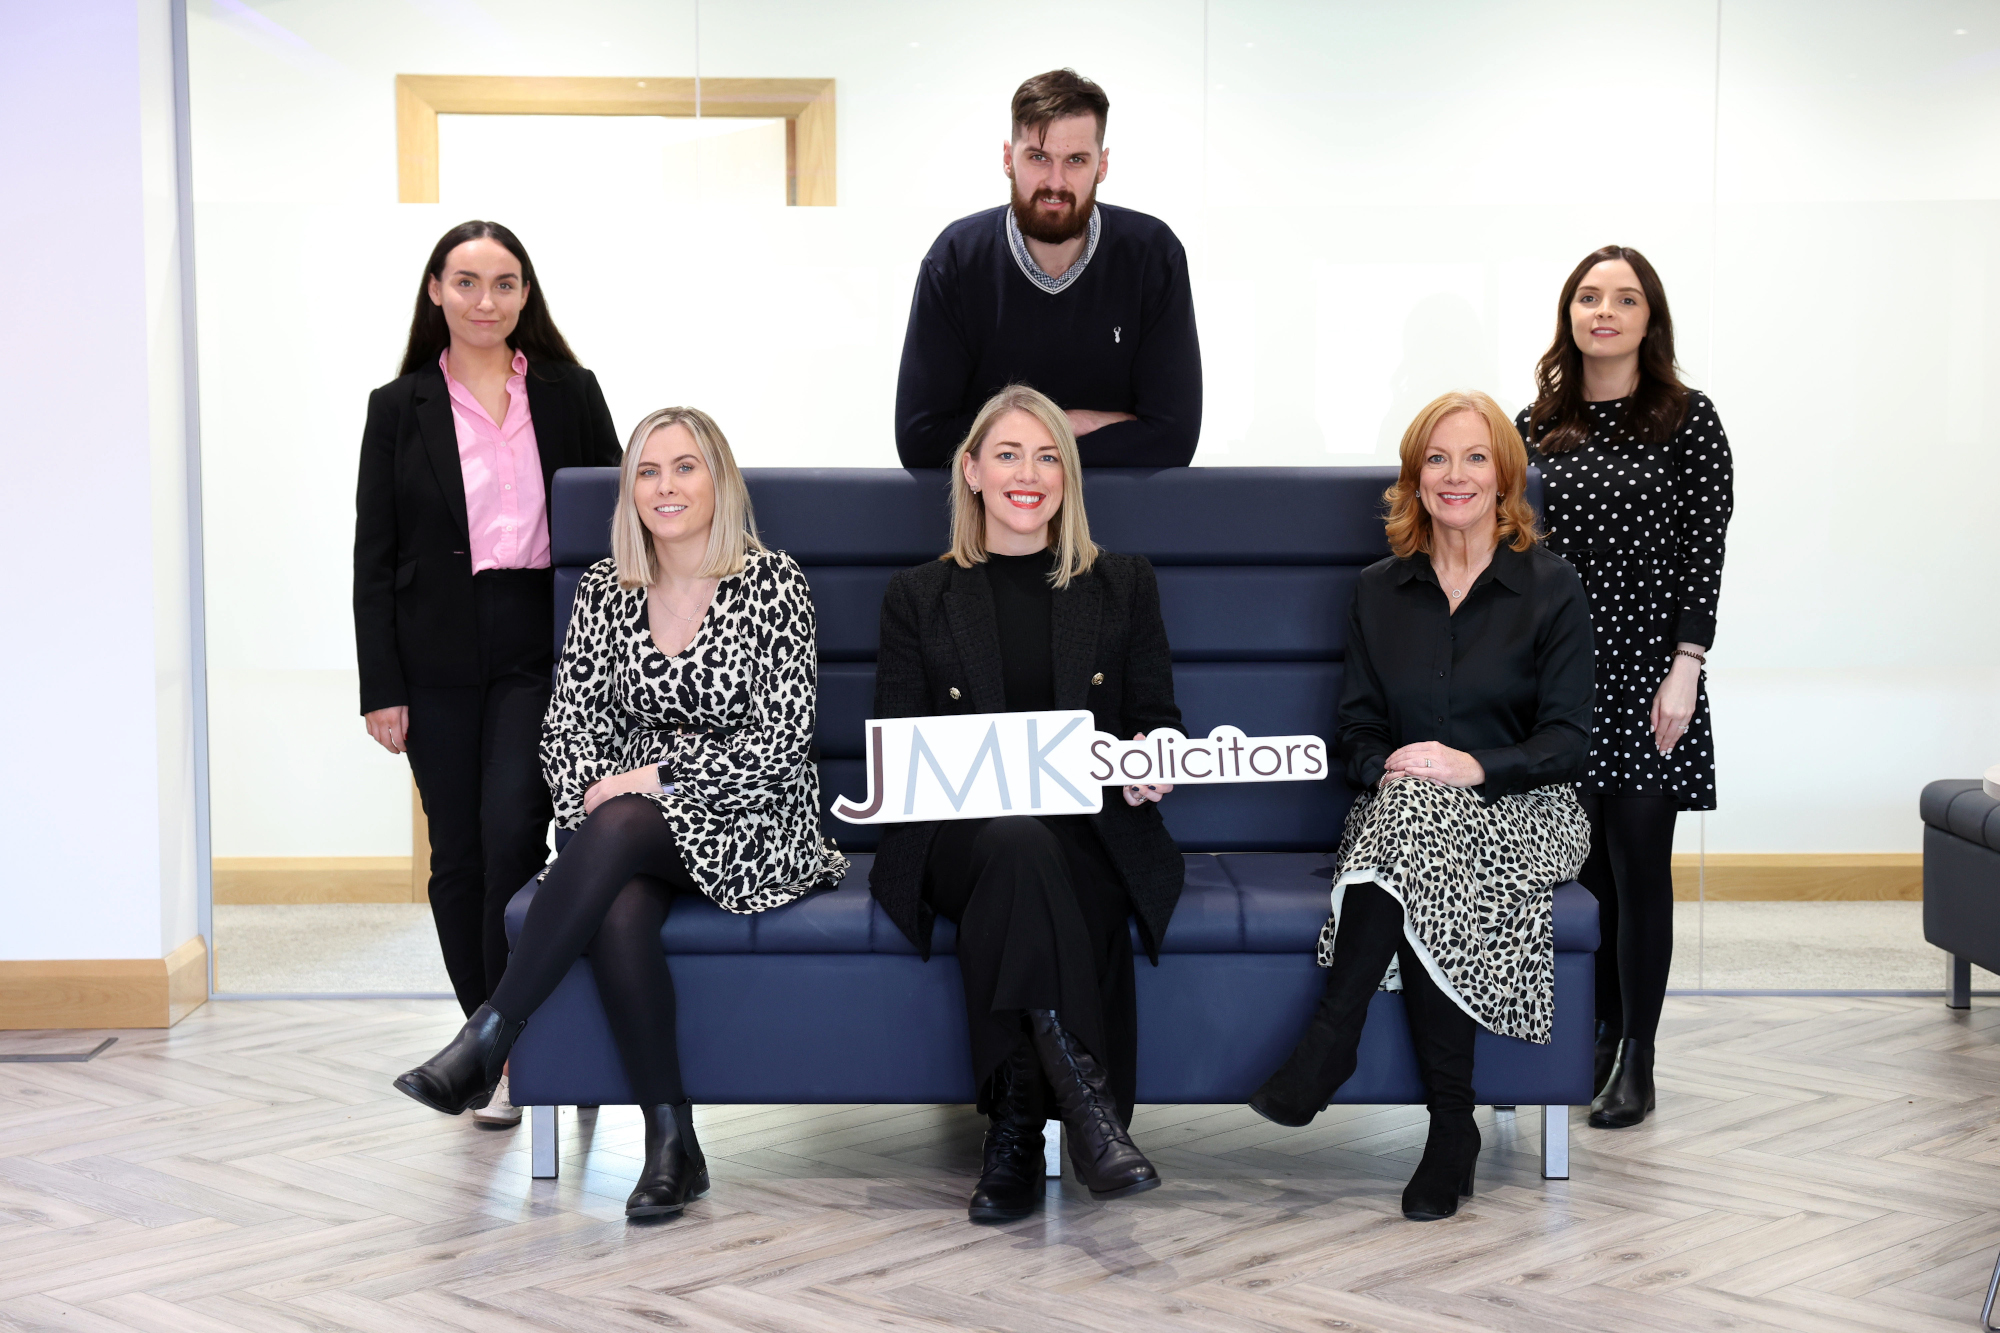 JMK Solicitors headcount has grown by a fifth since pandemic began